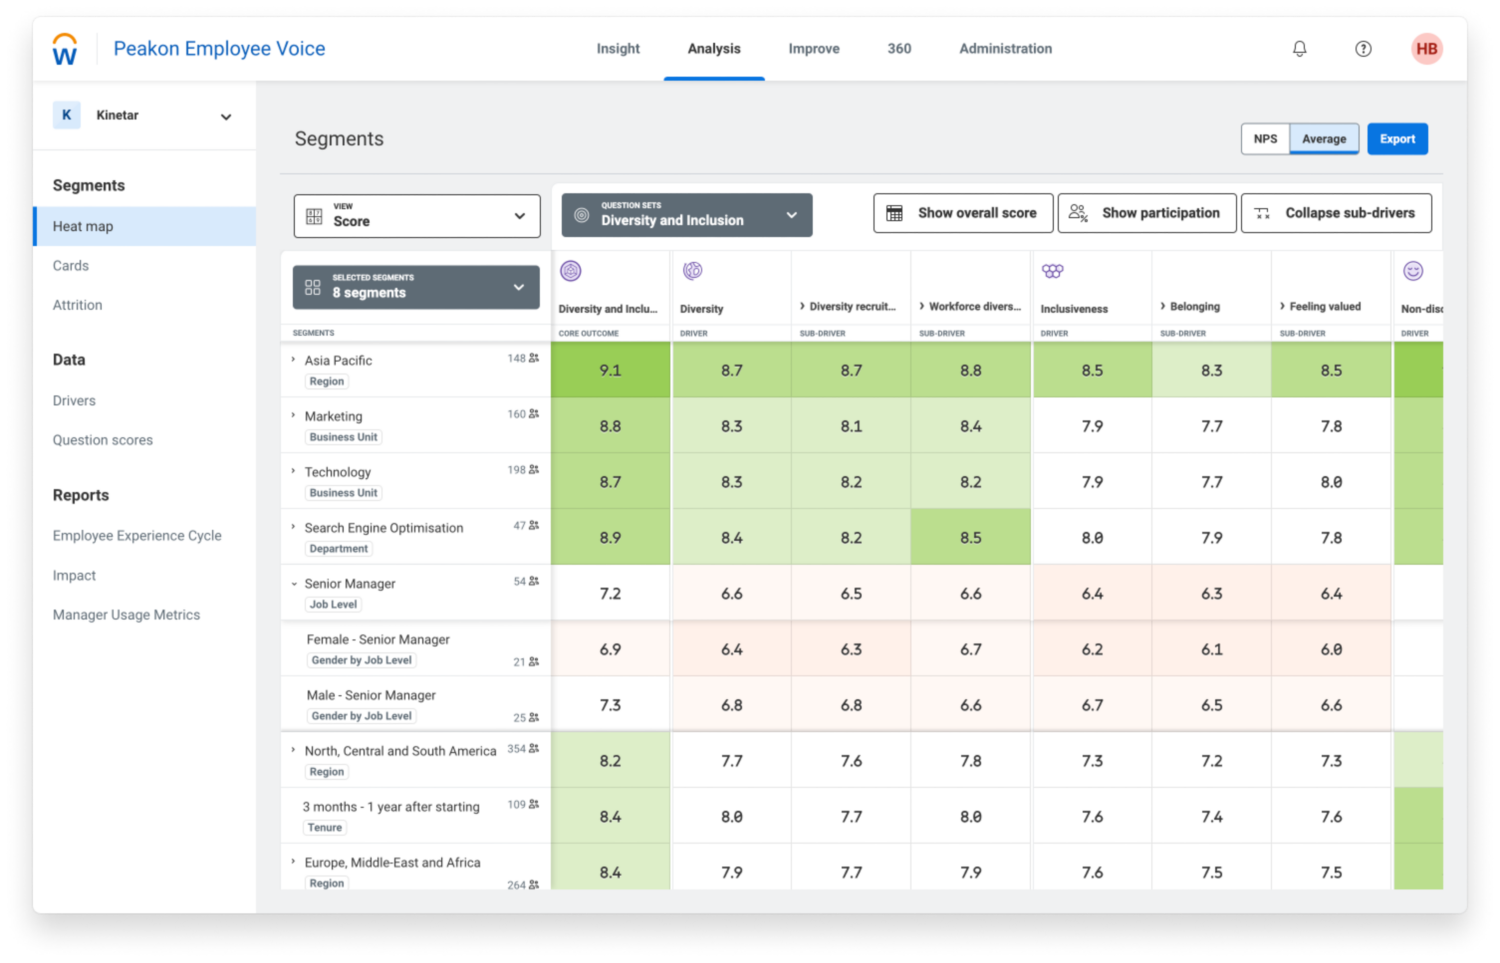 Peakon Employee Voice dashboard showing Diversity and Inclusion segments.